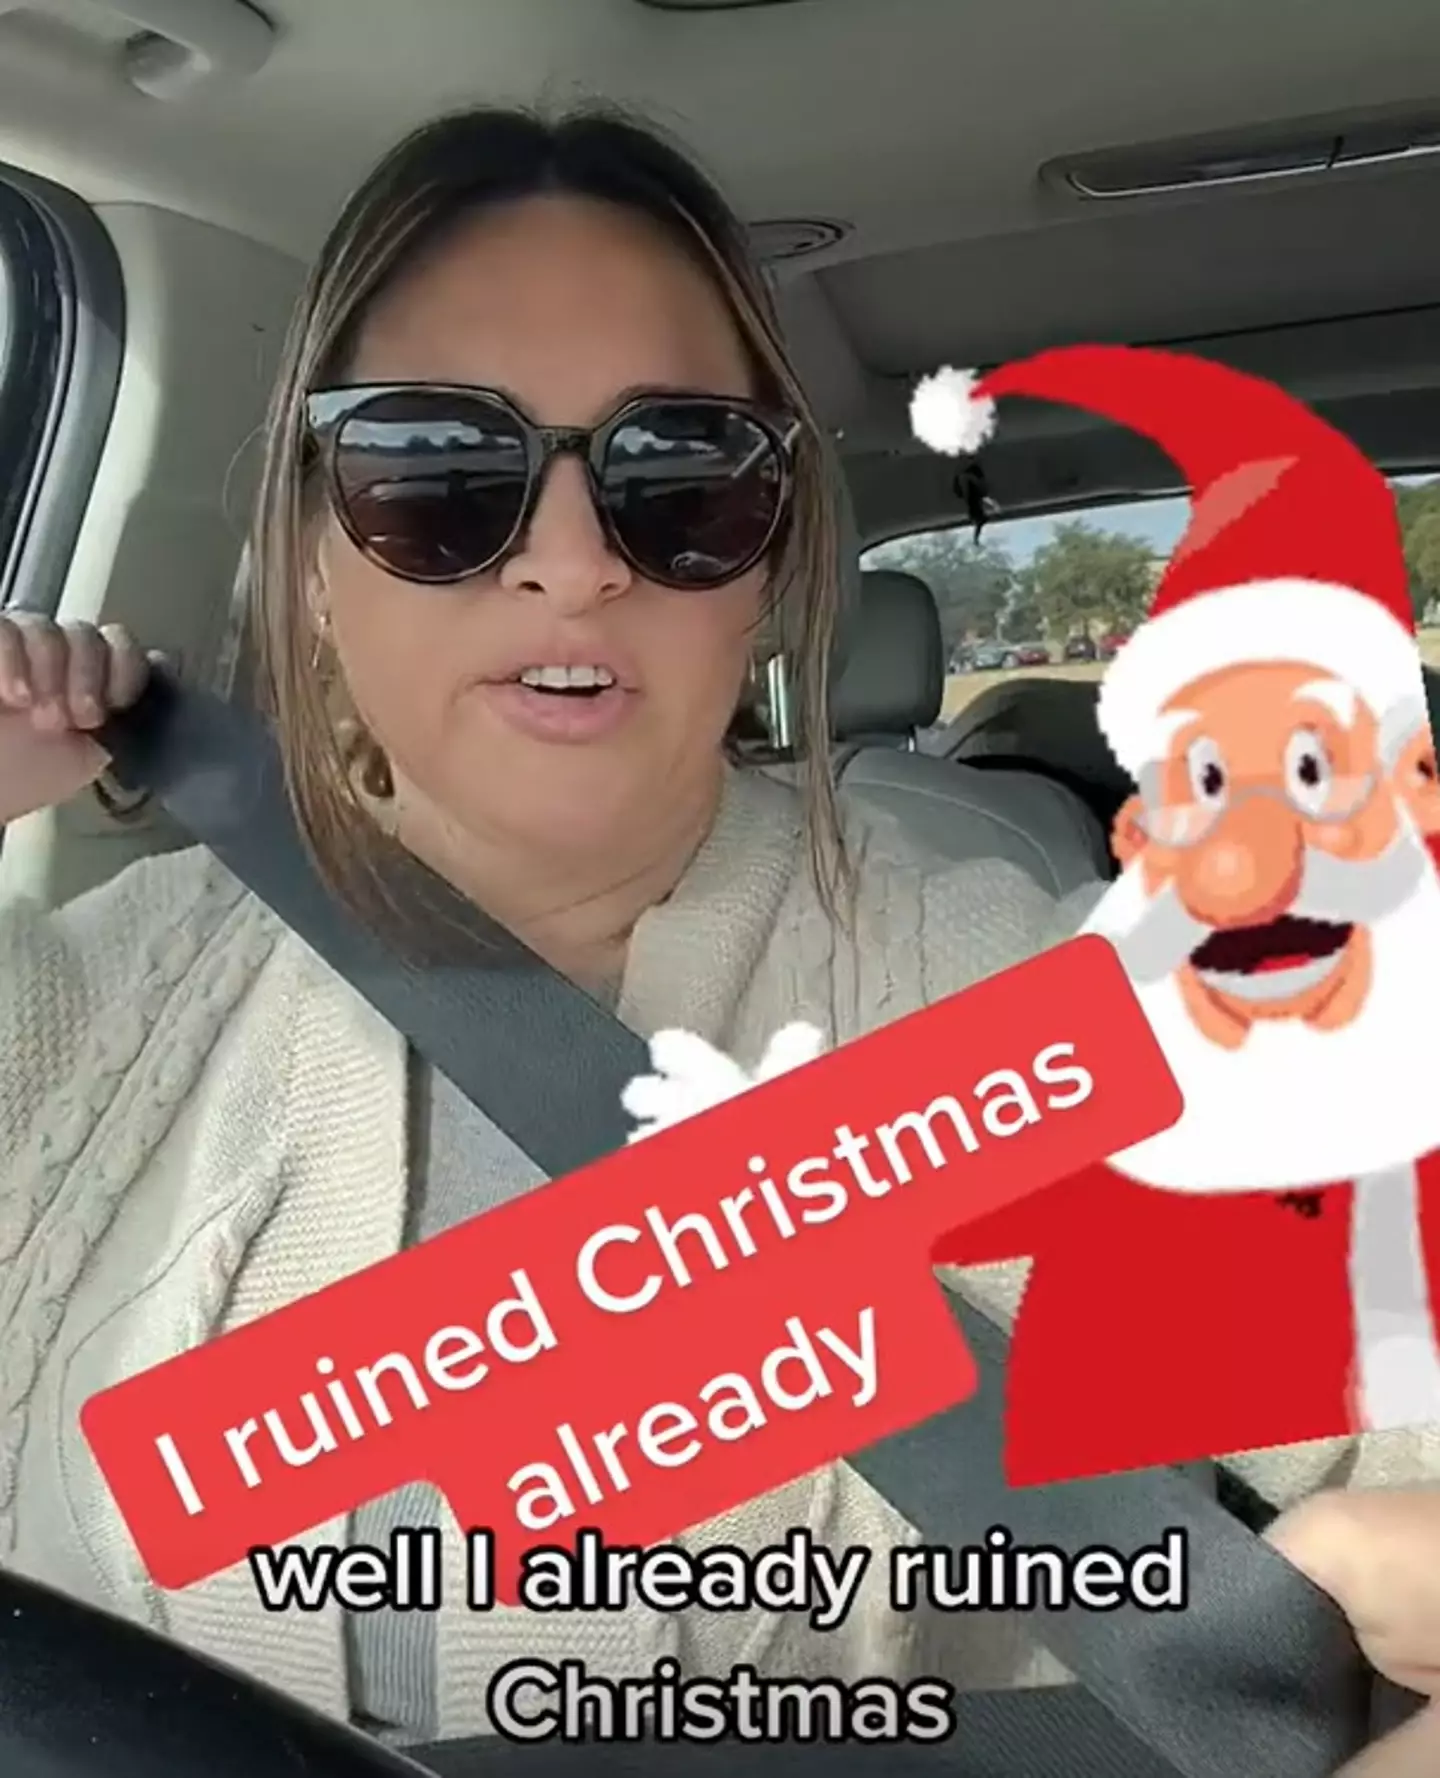 One mum was terrified she'd 'ruined Christmas' before it was even December after her daughter spotted her main present.